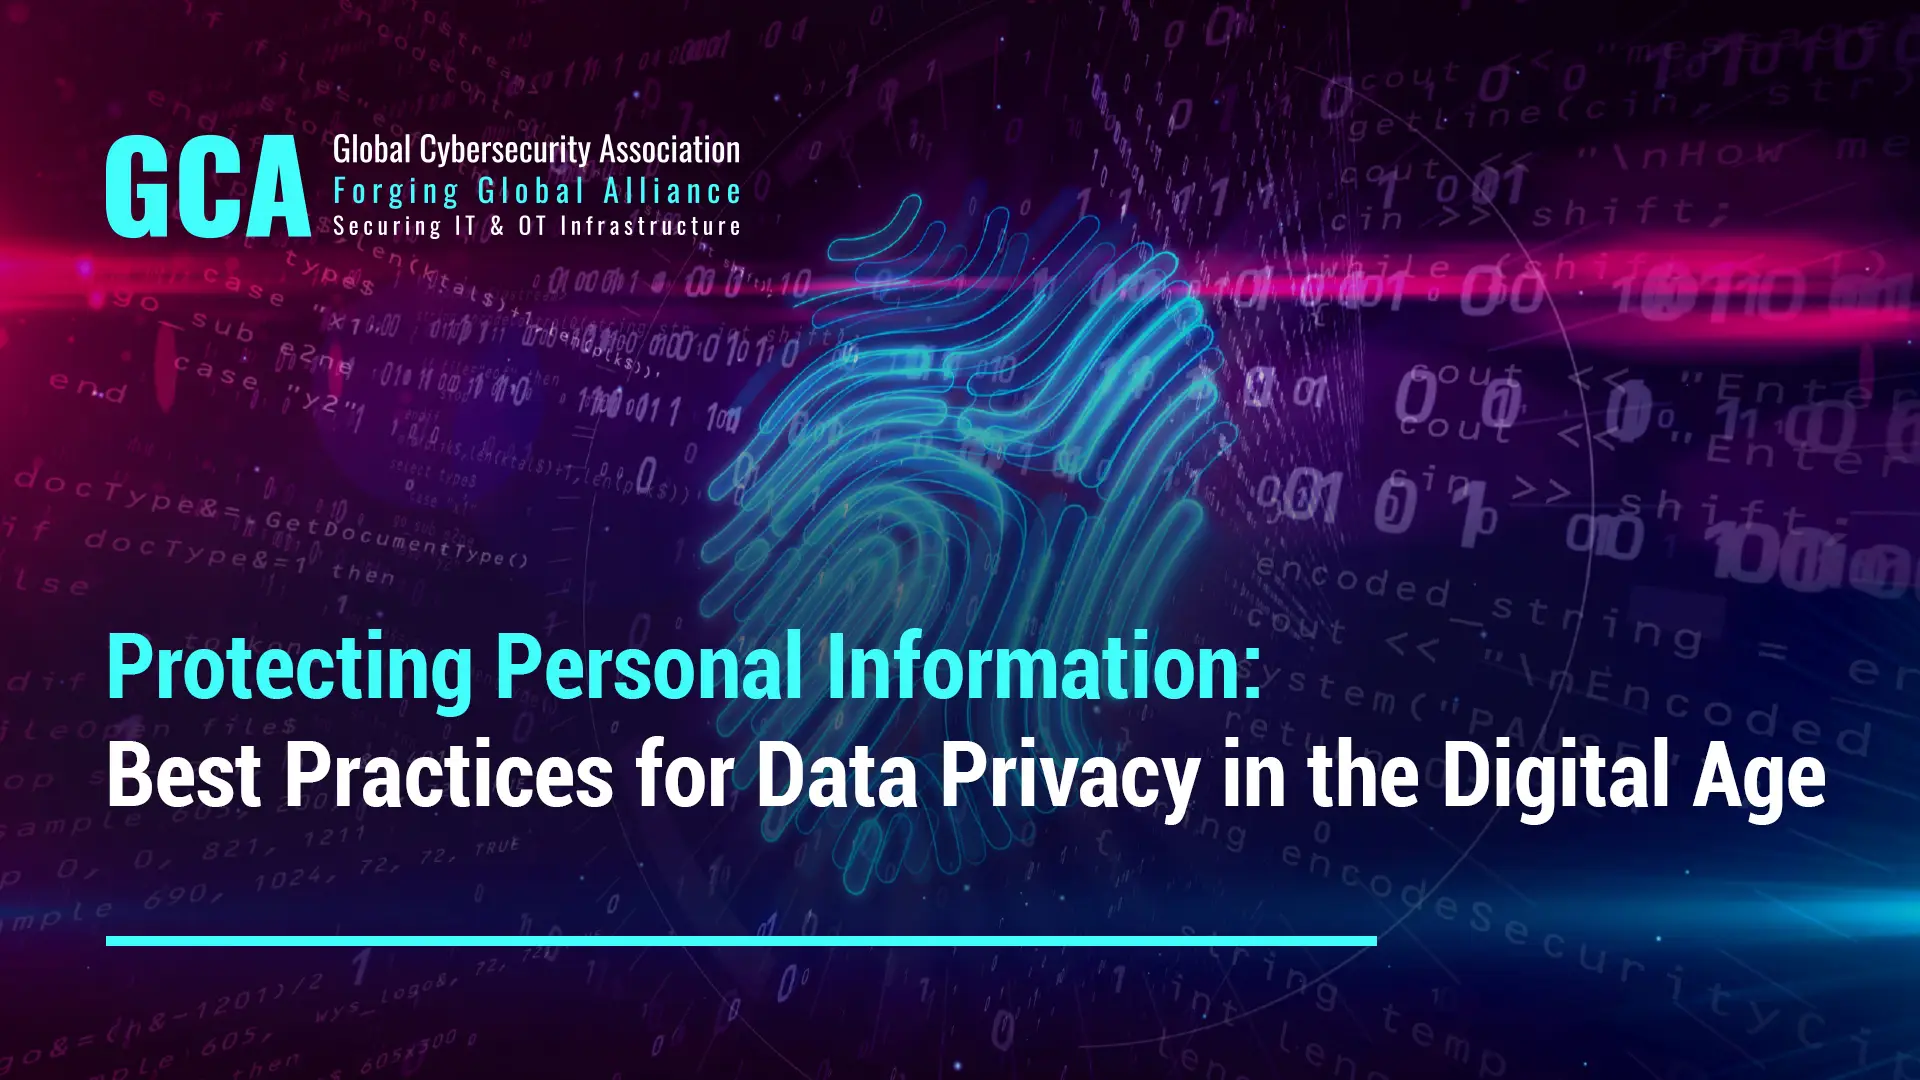 Protecting Personal Information Best Practices for Data Privacy in the Digital Age